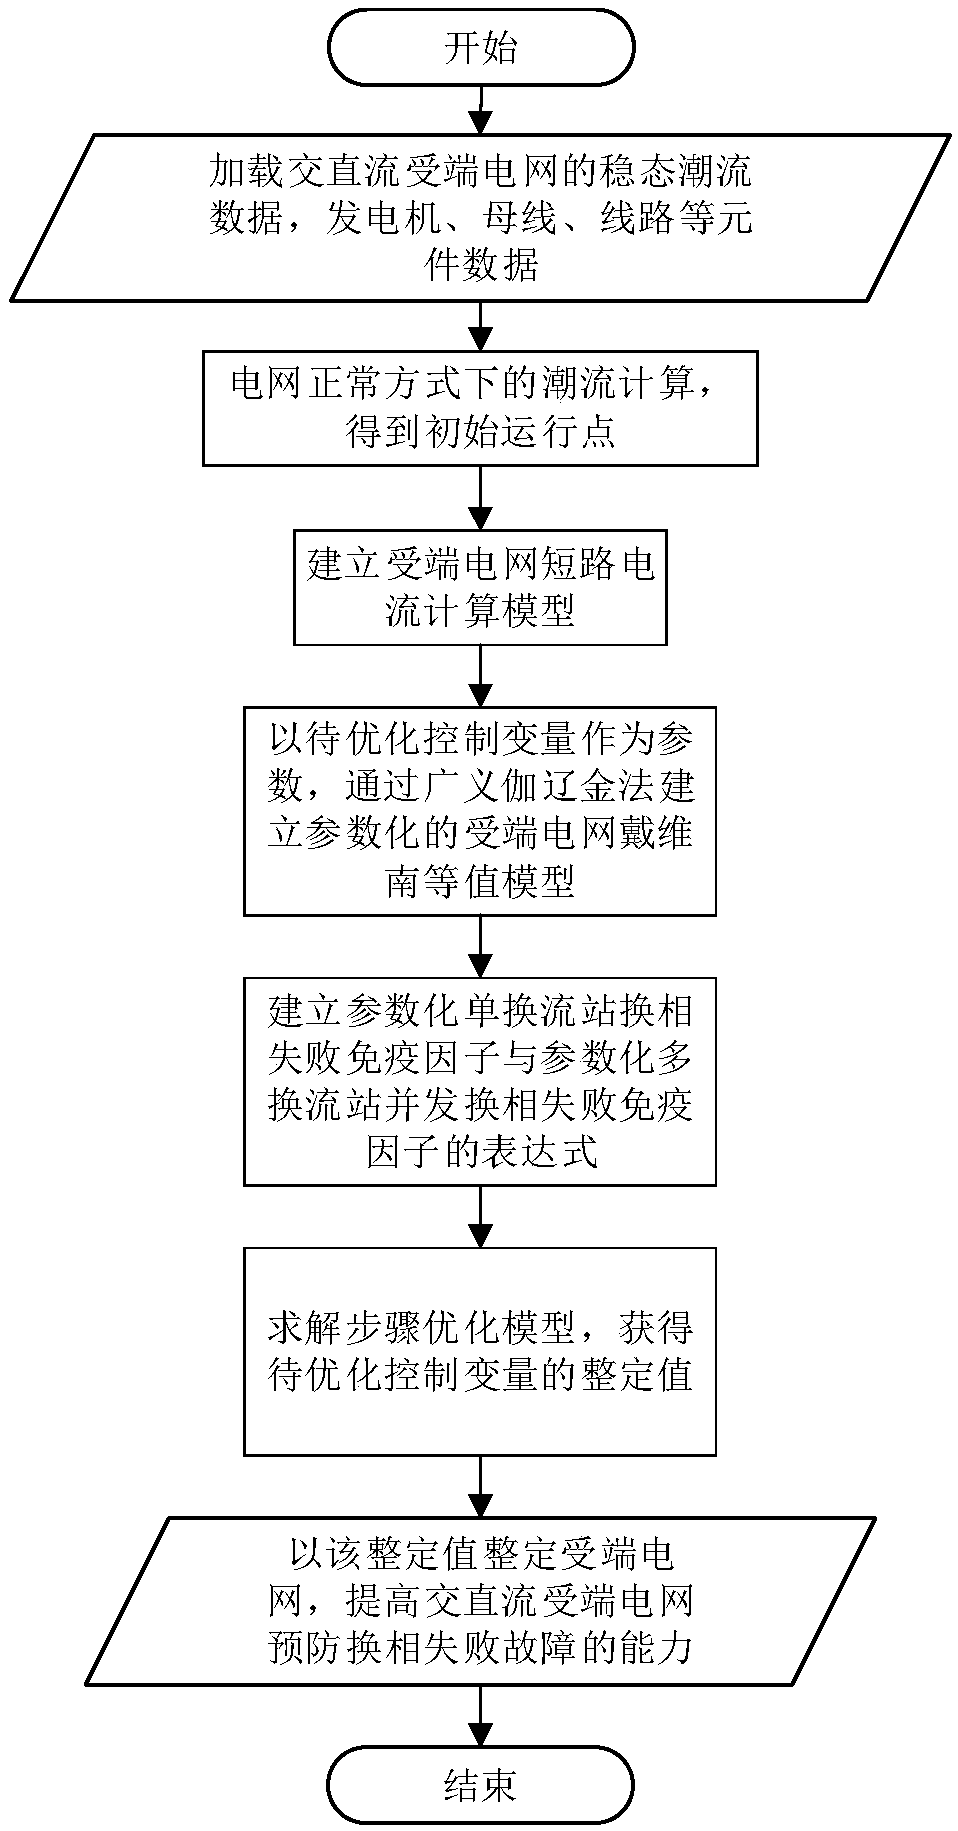 Parameterization Thevenin equivalence-based alternating current direct current received end power grid commutation failure fault preventive method